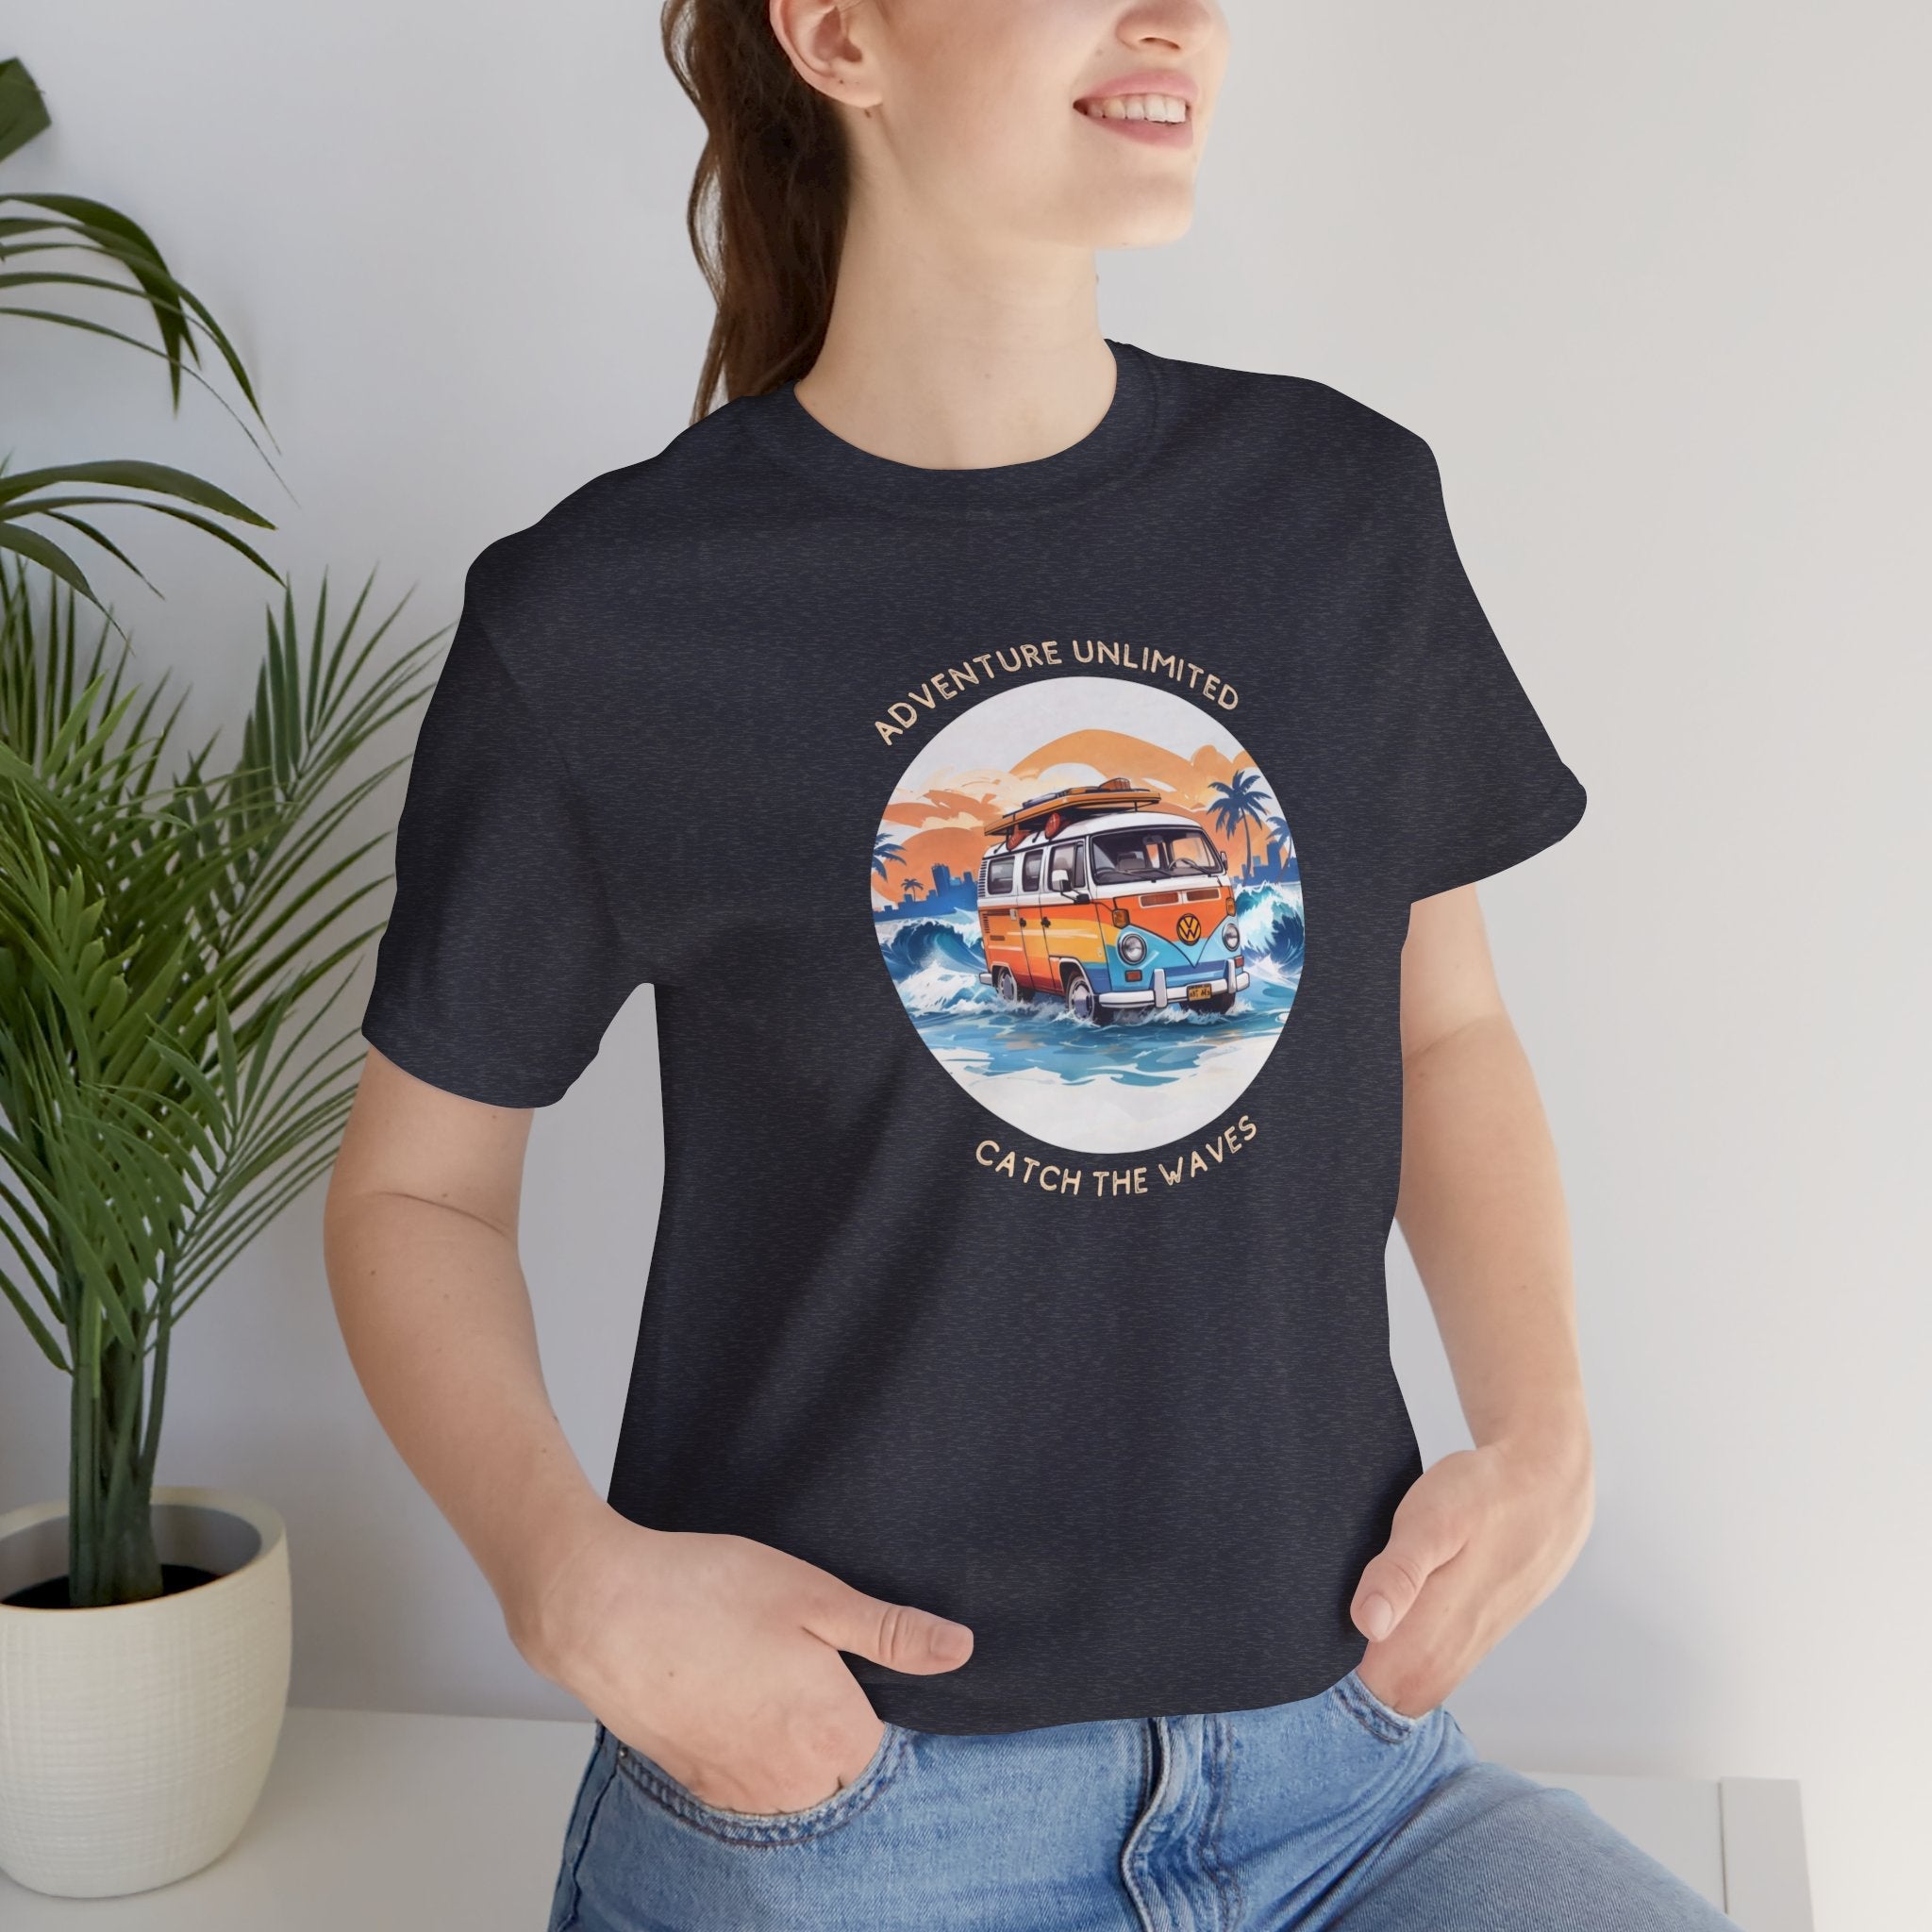 Adventure Unlimited Black T-Shirt With ’It’s the Way’ Printed - Unisex Jersey Tee